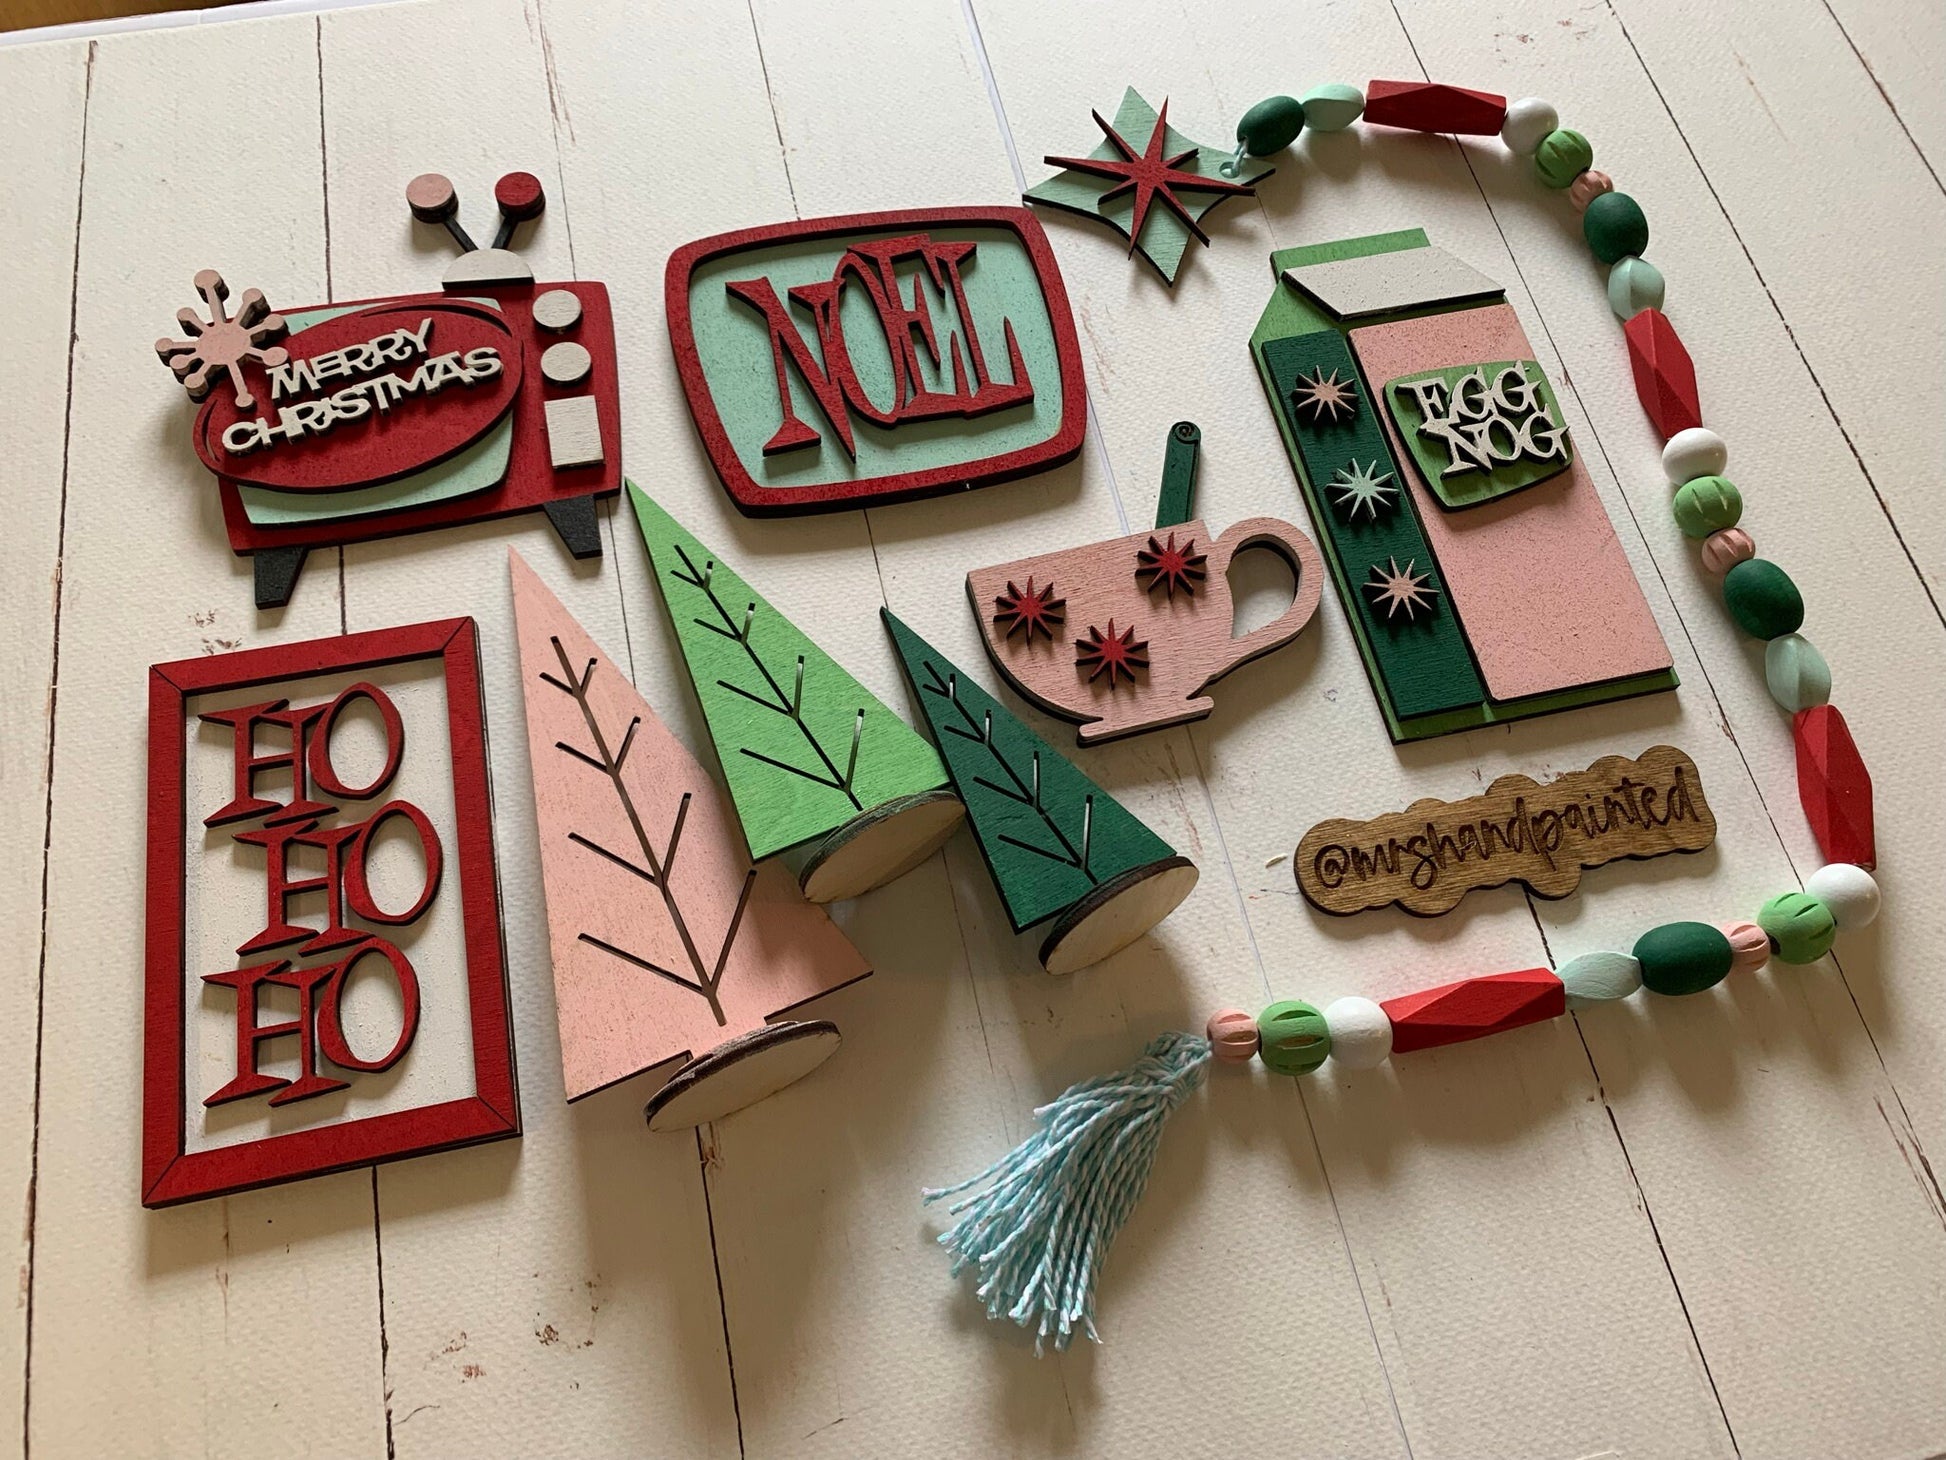 Retro Holiday - Christmas Tiered Tray Decor - Laser Cut Wood Painted, Mid Century Modern Theme Decorations